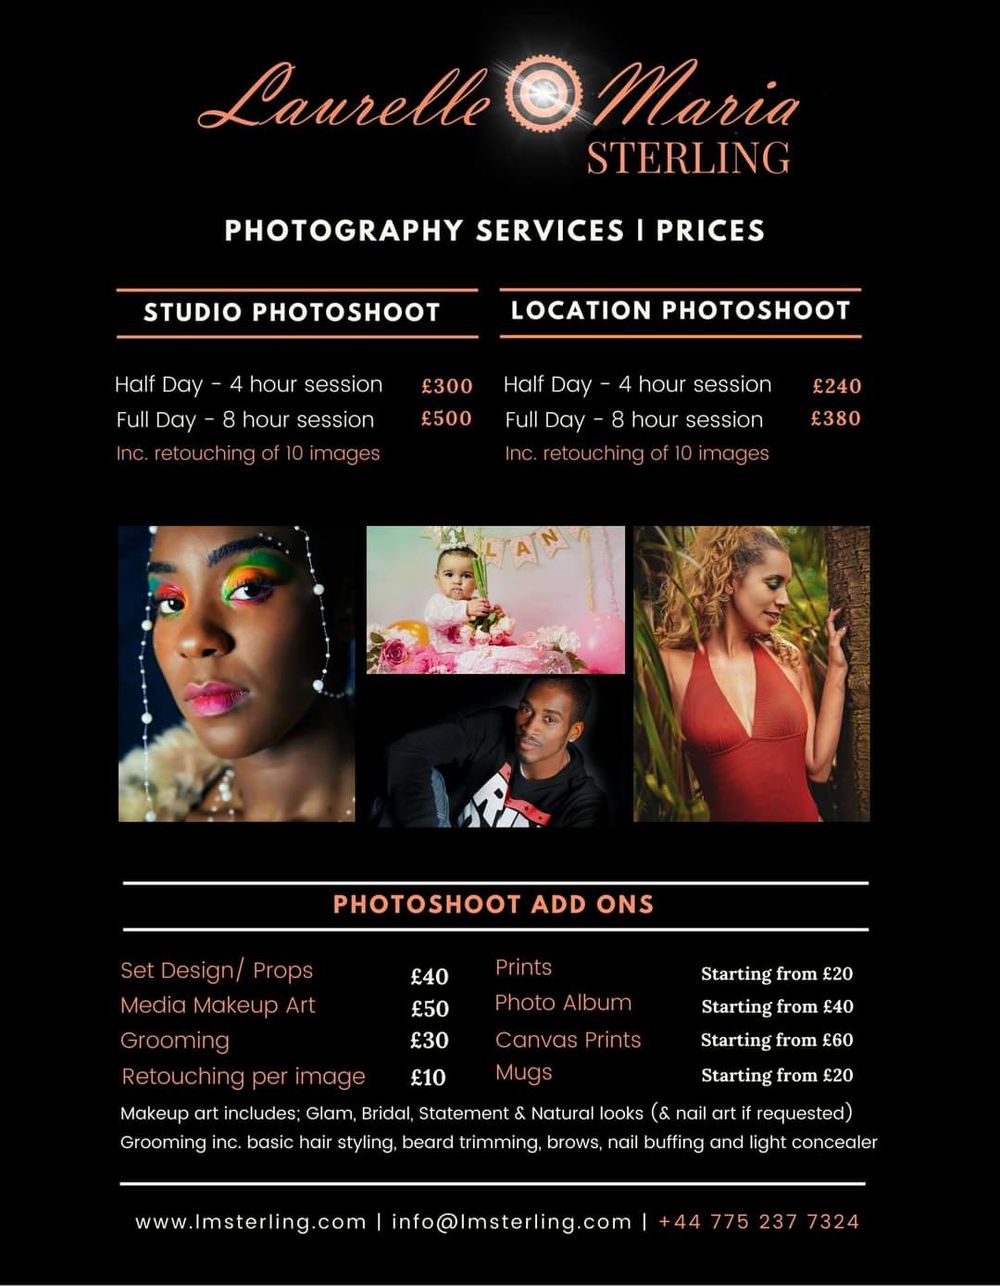 PHOTOGRAPHY SERVICES & PRICES - AVAILABLE NOW!

(additional creative media service fees coming soon)

www.lmsterling.com